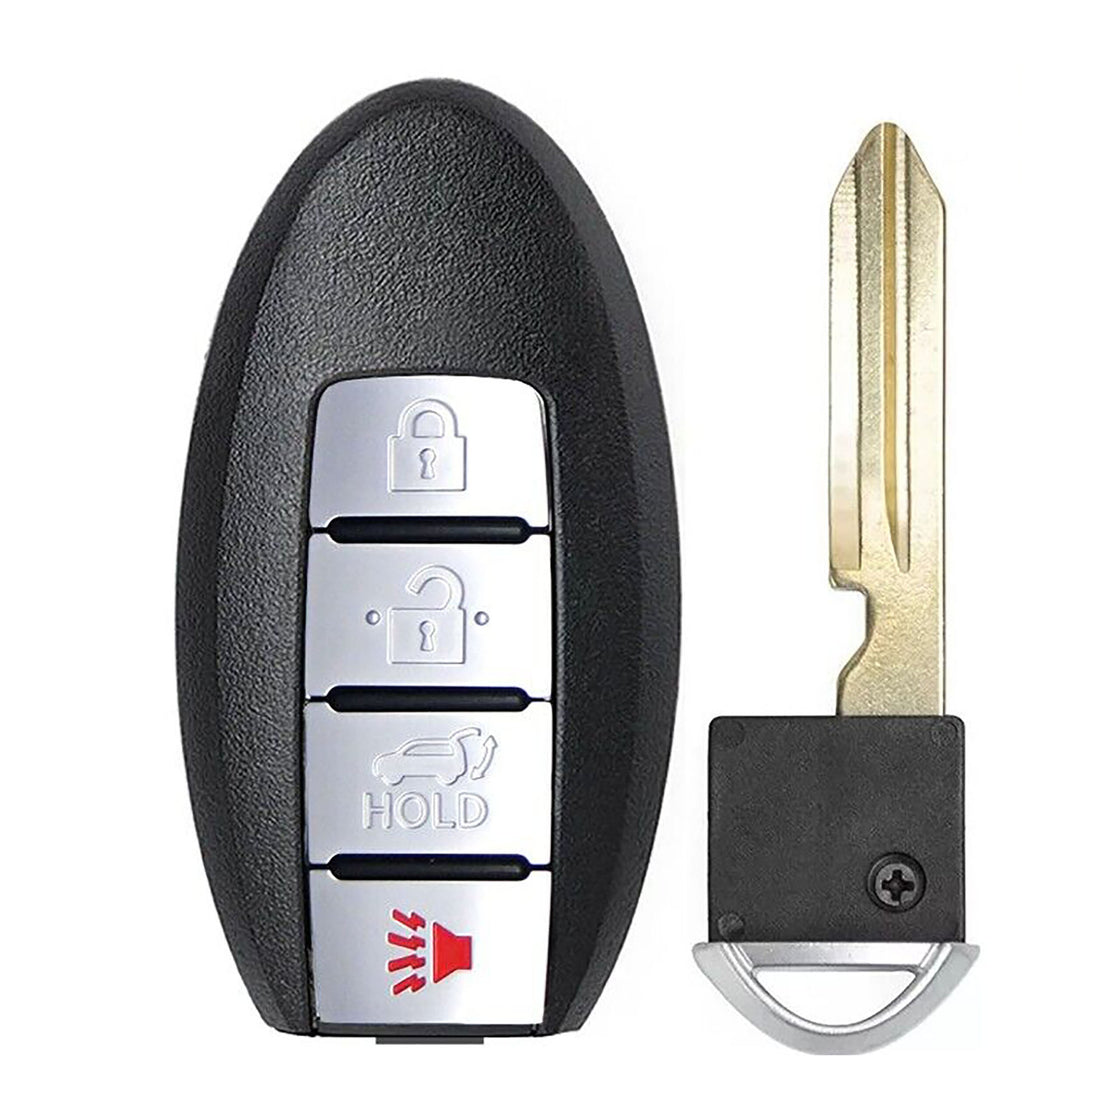 1x New Replacement Proximity Key Fob Compatible with & Fit For Nissan Infiniti Read Description - MPN CWTWBU624-02